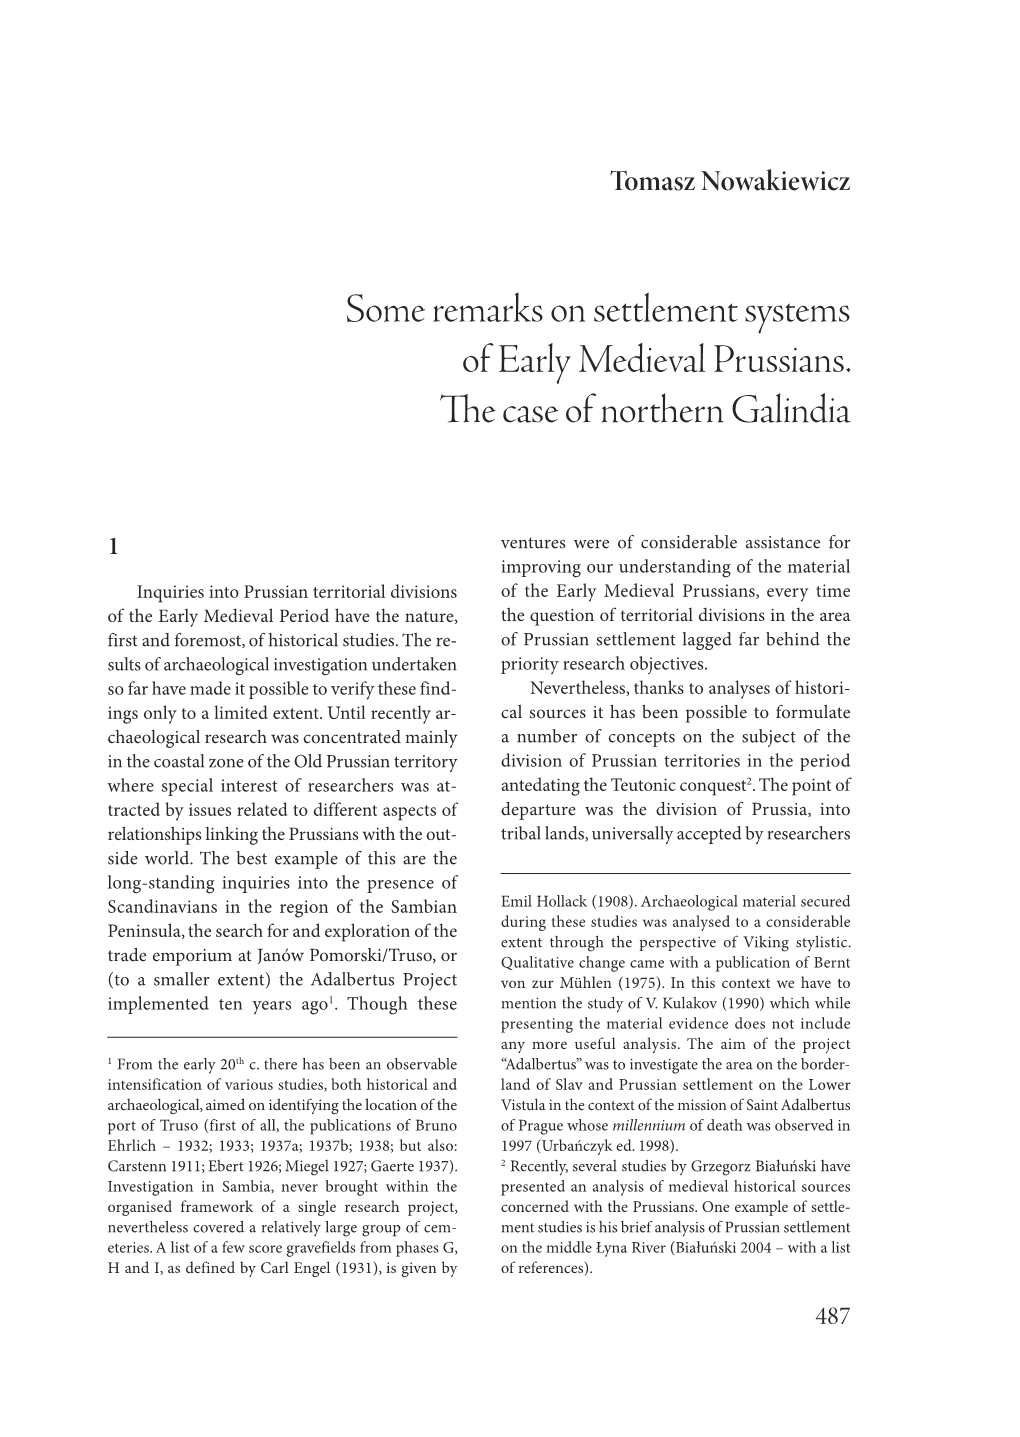 Some Remarks on Settlement Systems of Early Medieval Prussians. E Case